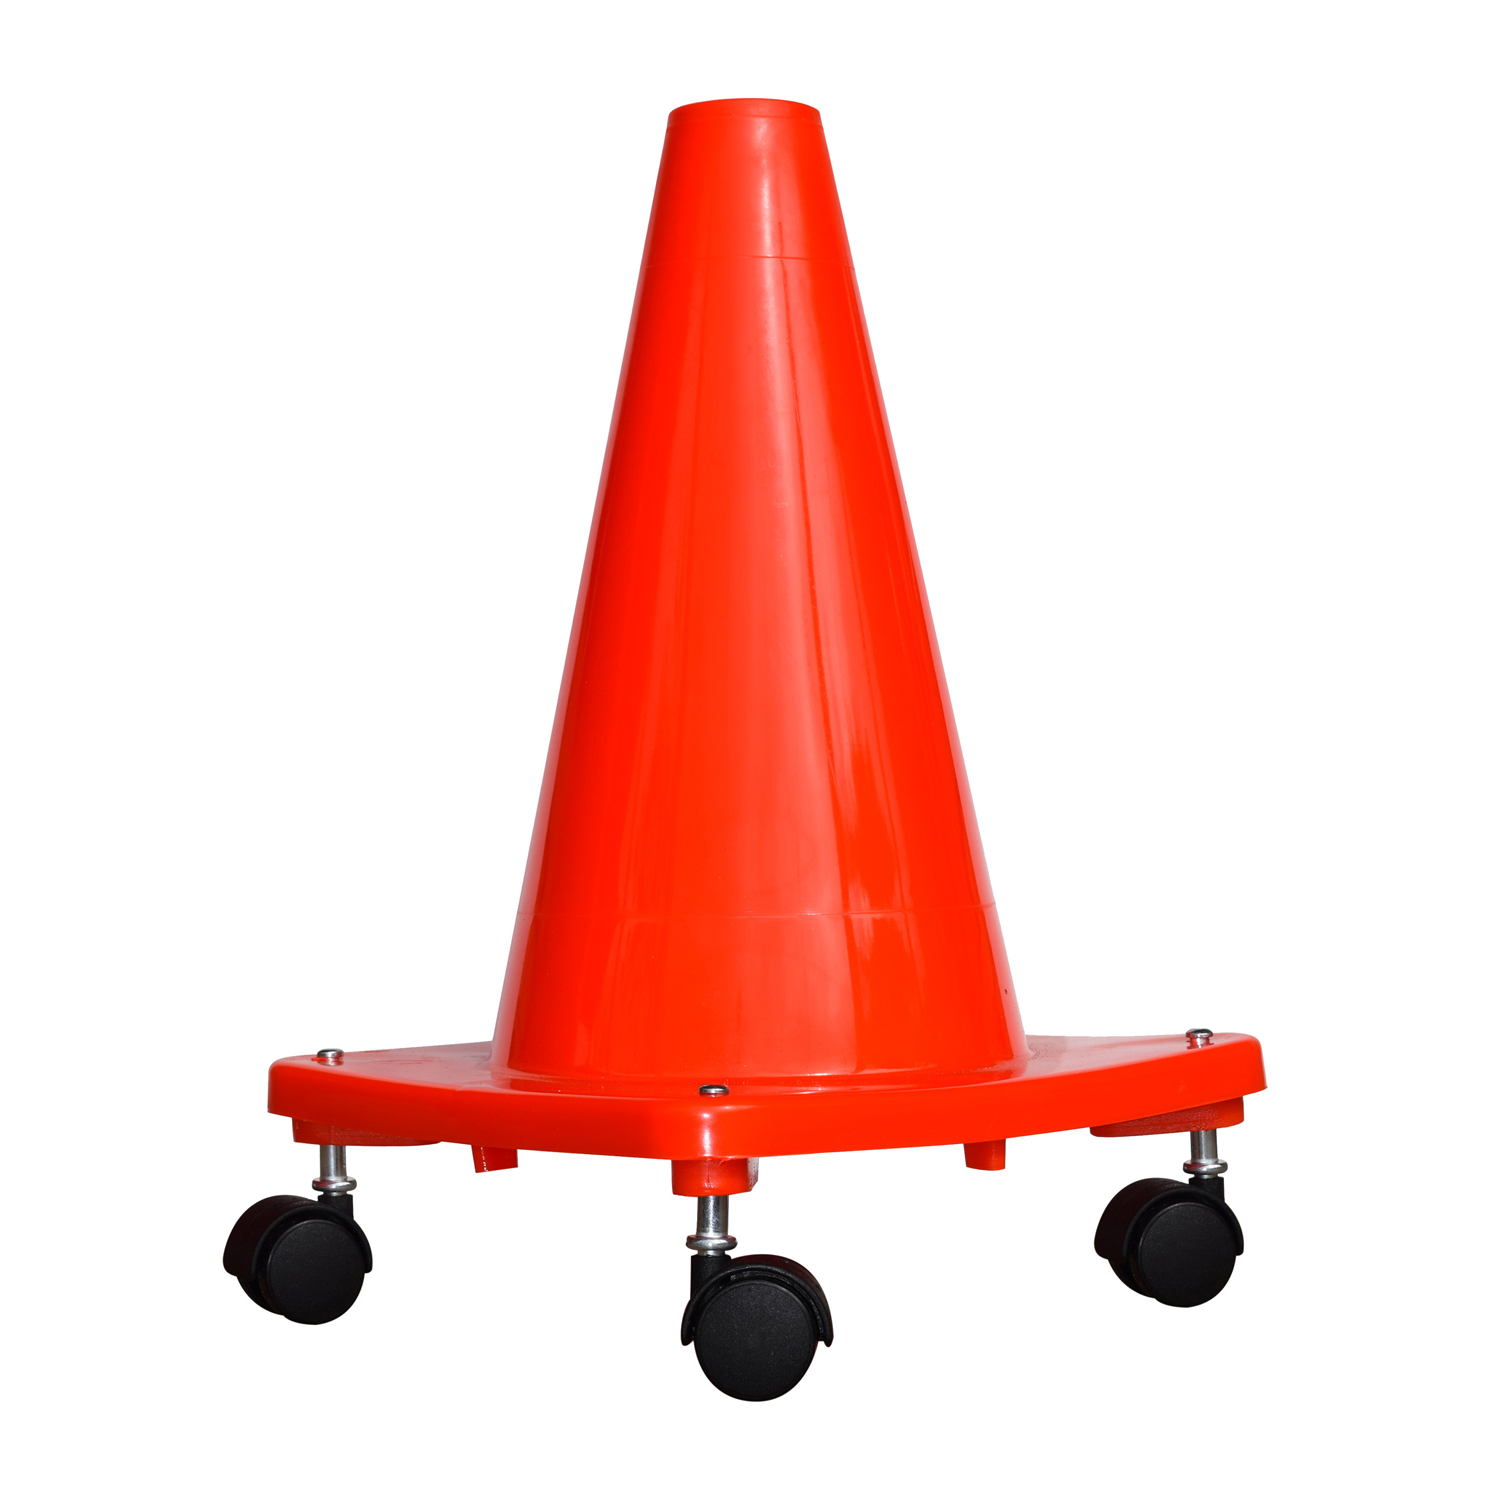 An orange safety cone with wheels